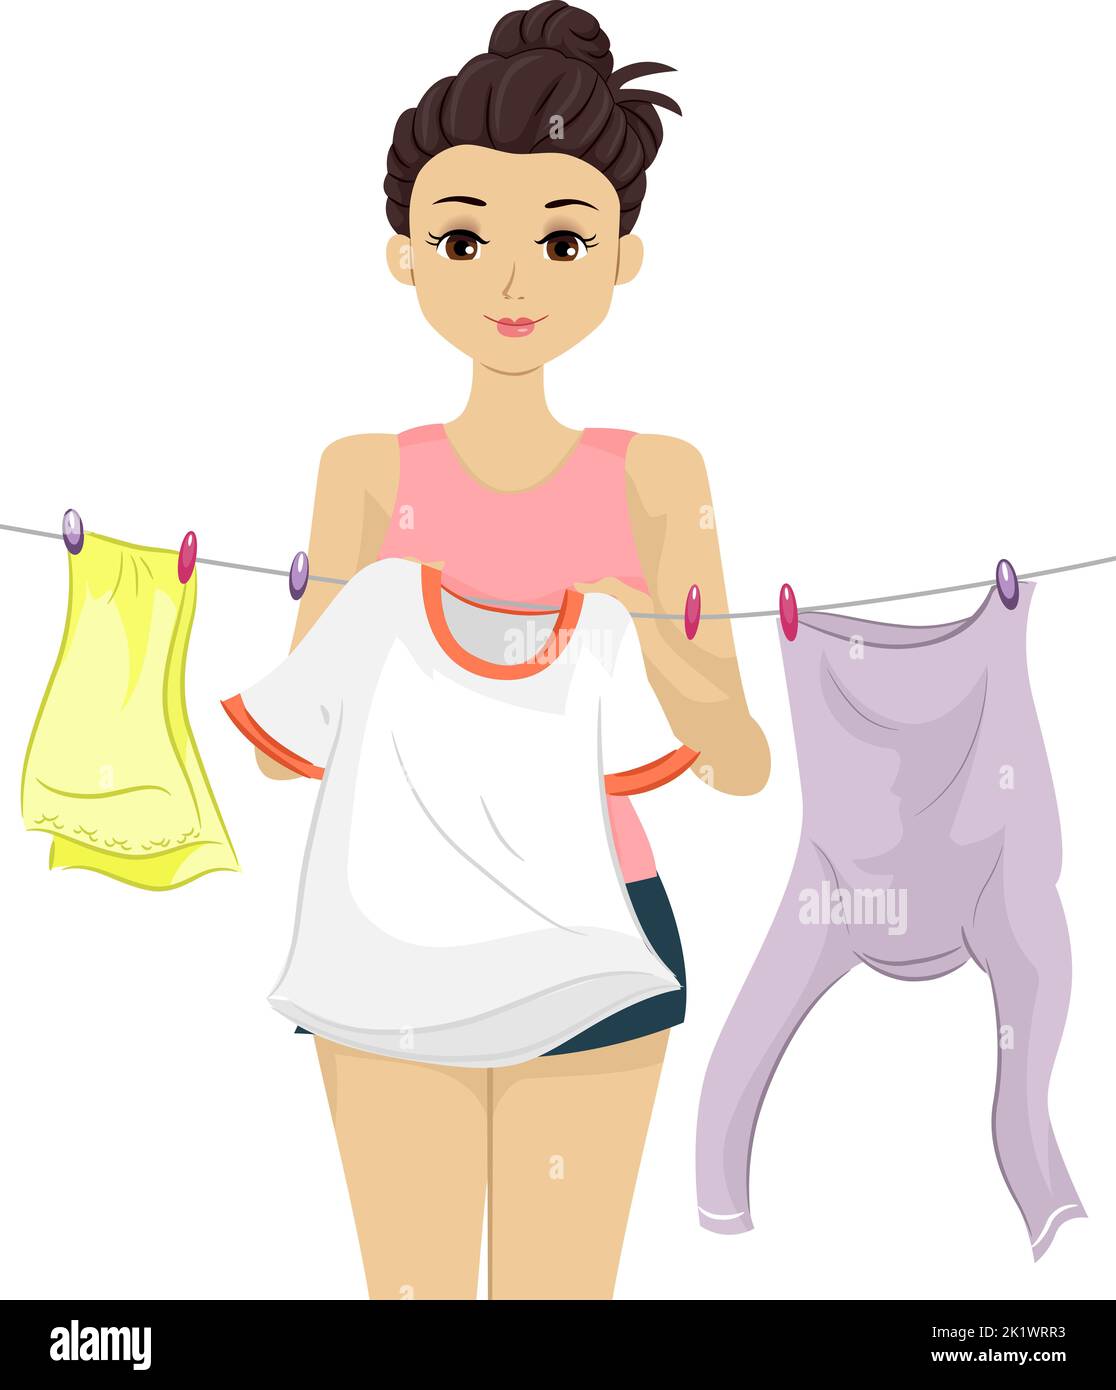 Illustration of Teen Girl Hanging Freshly Laundered Clothes on Clothesline Stock Photo